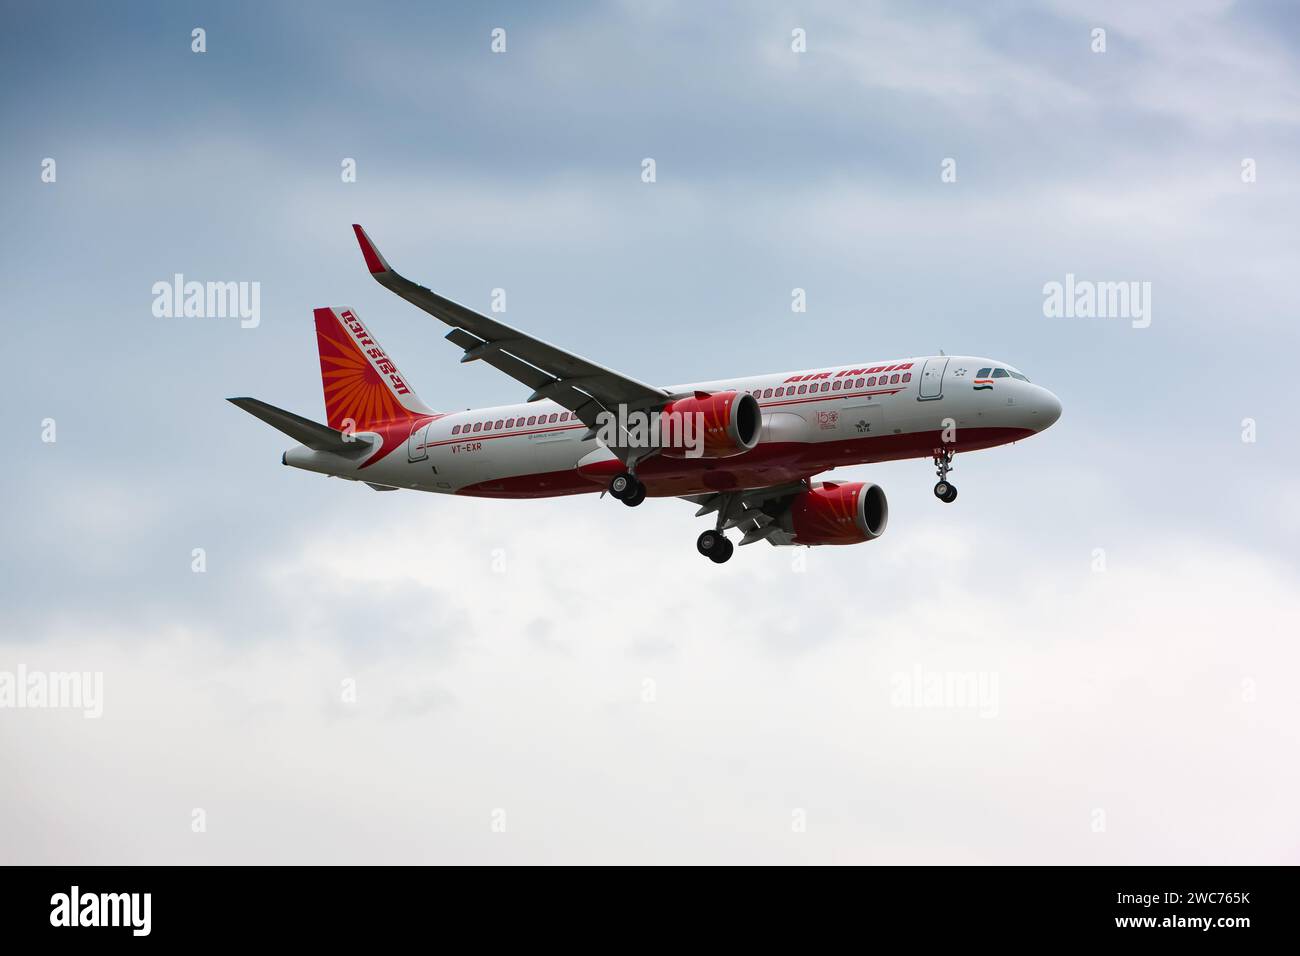 Boryspil, Ukraine - July 25, 2020: Airplane Airbus A320neo (VT-EXR) of Air India is landing at Boryspil International Airport Stock Photo